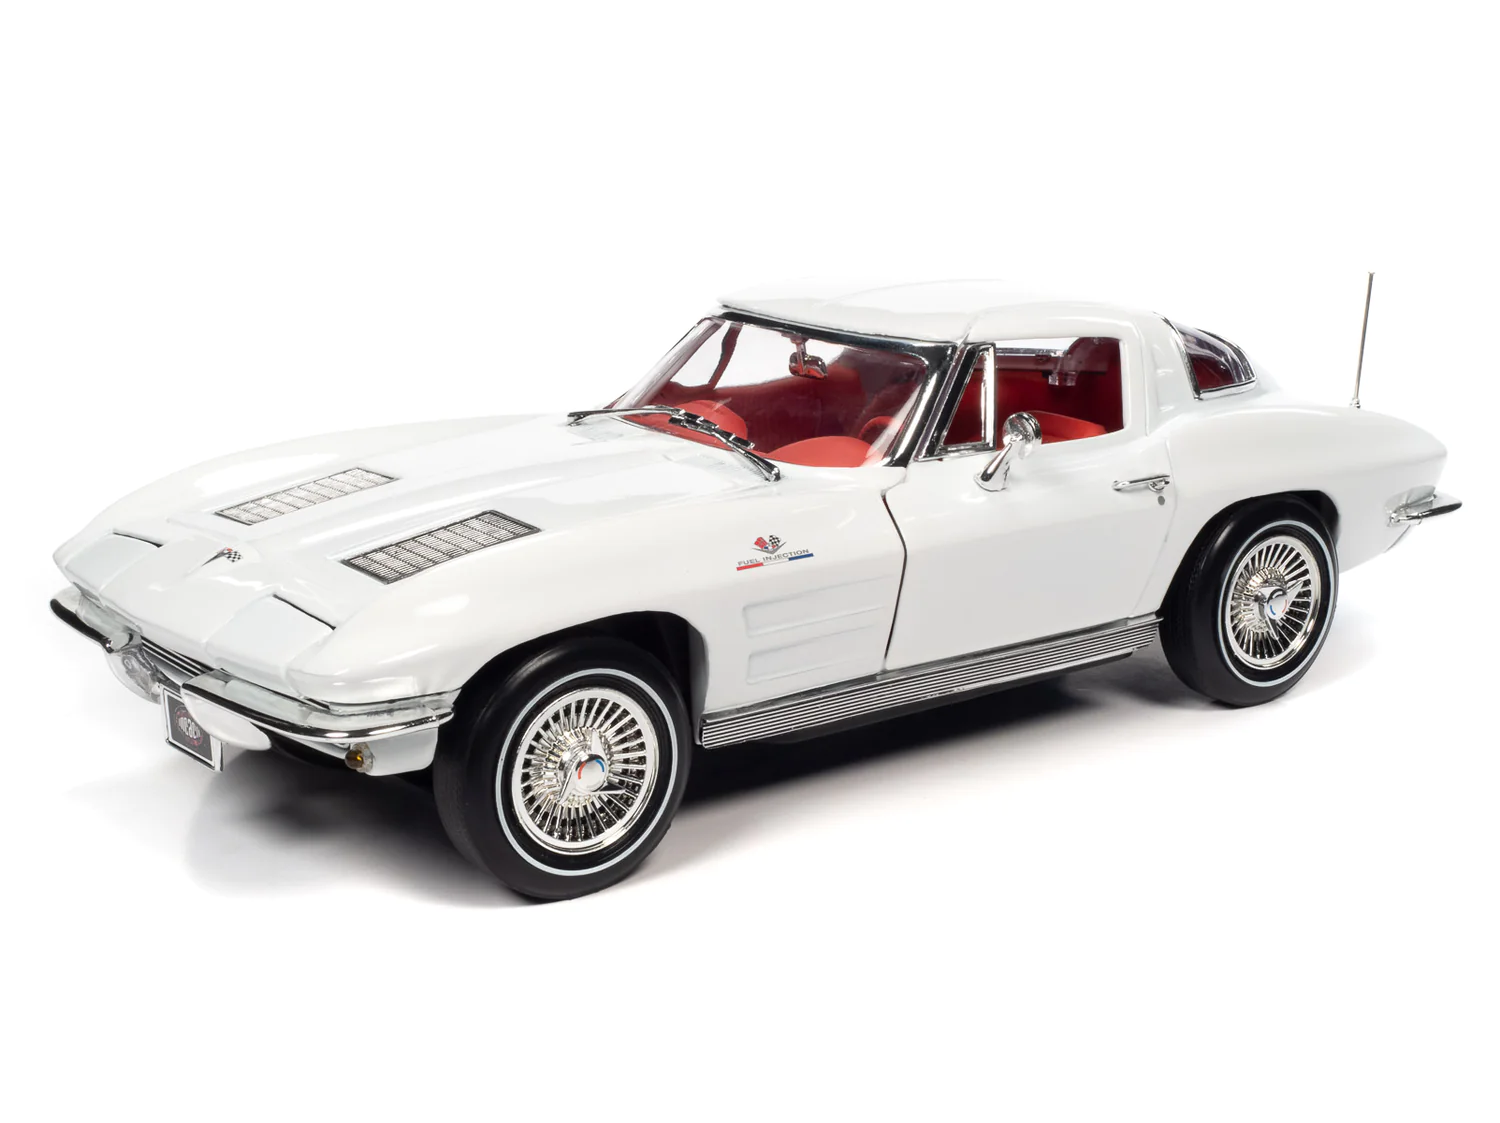 Chevrolet Corvette Coupe 1963 (MCACN) Ermine White with Red interior American Muscle Auto World 1:18